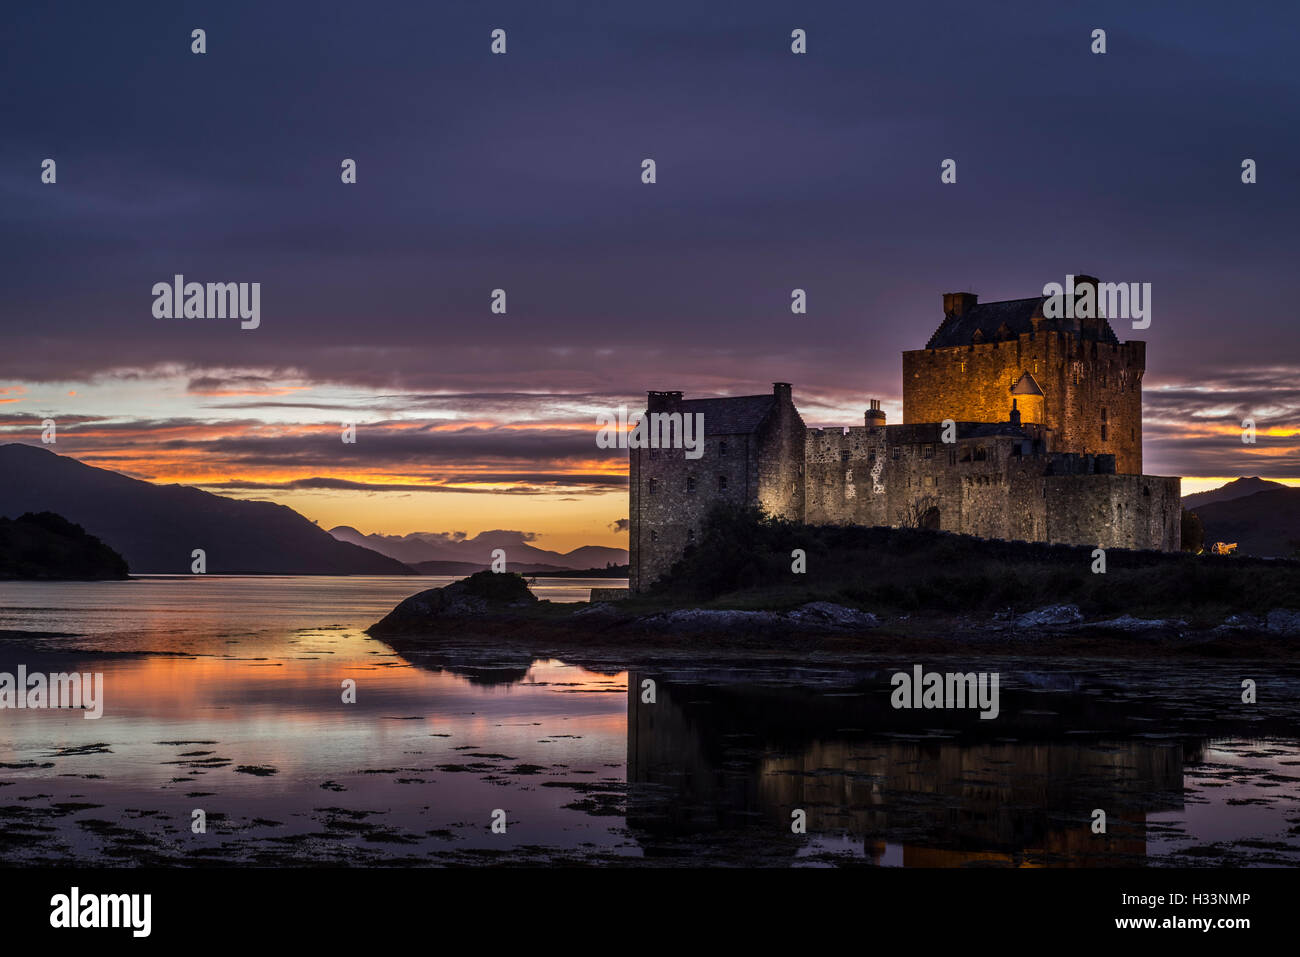 Illuminated Eilean Donan Castle at sunset in Loch Duich, Ross and Cromarty, Western Highlands of Scotland, UK Stock Photo